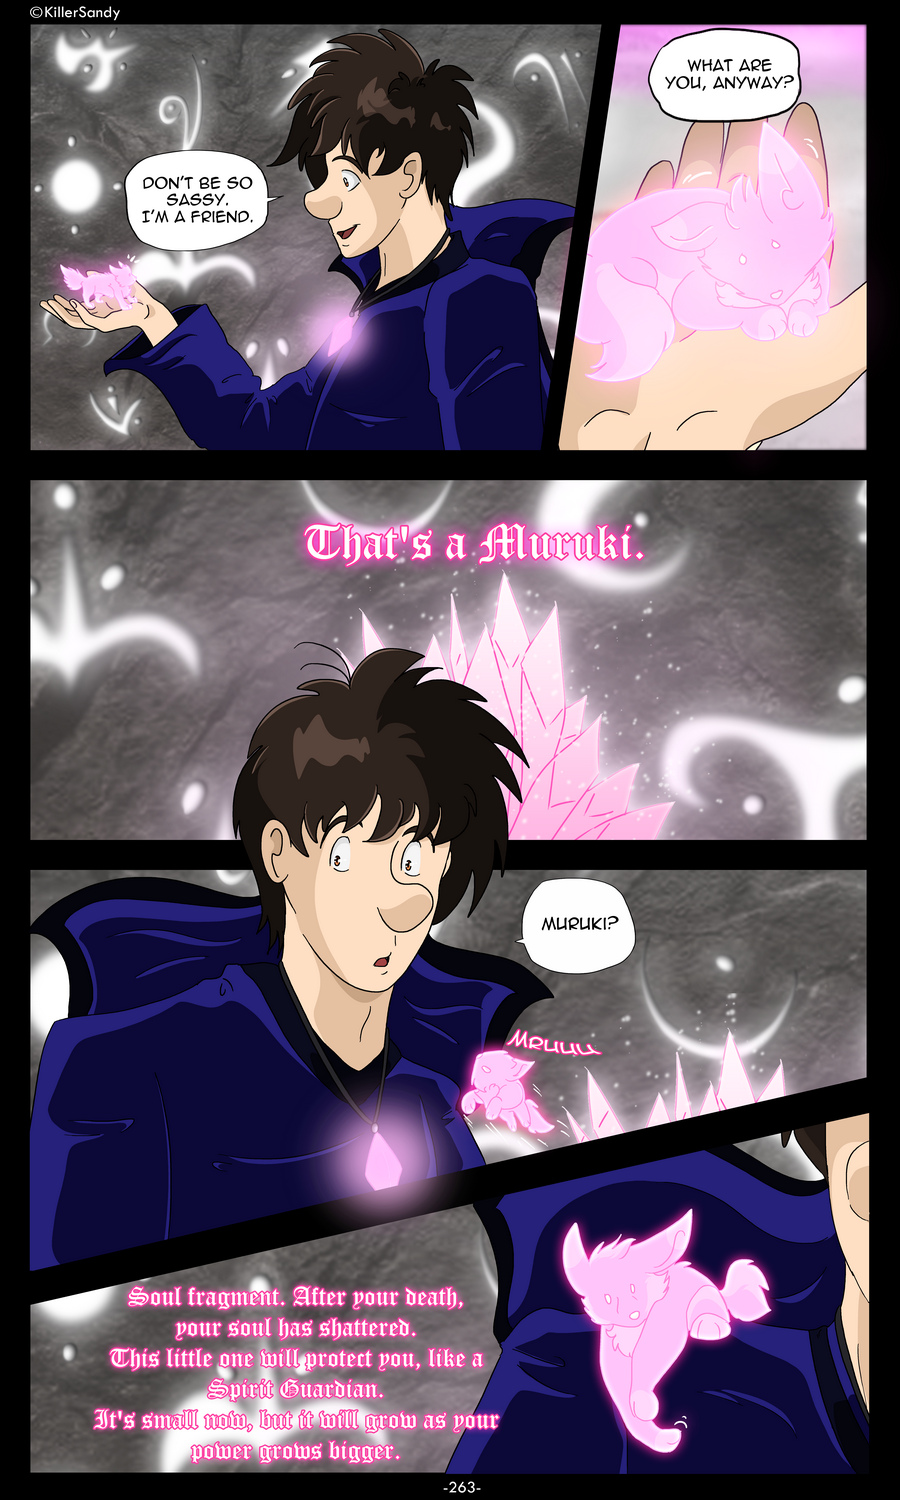 The Prince of the Moonlight Stone page 263